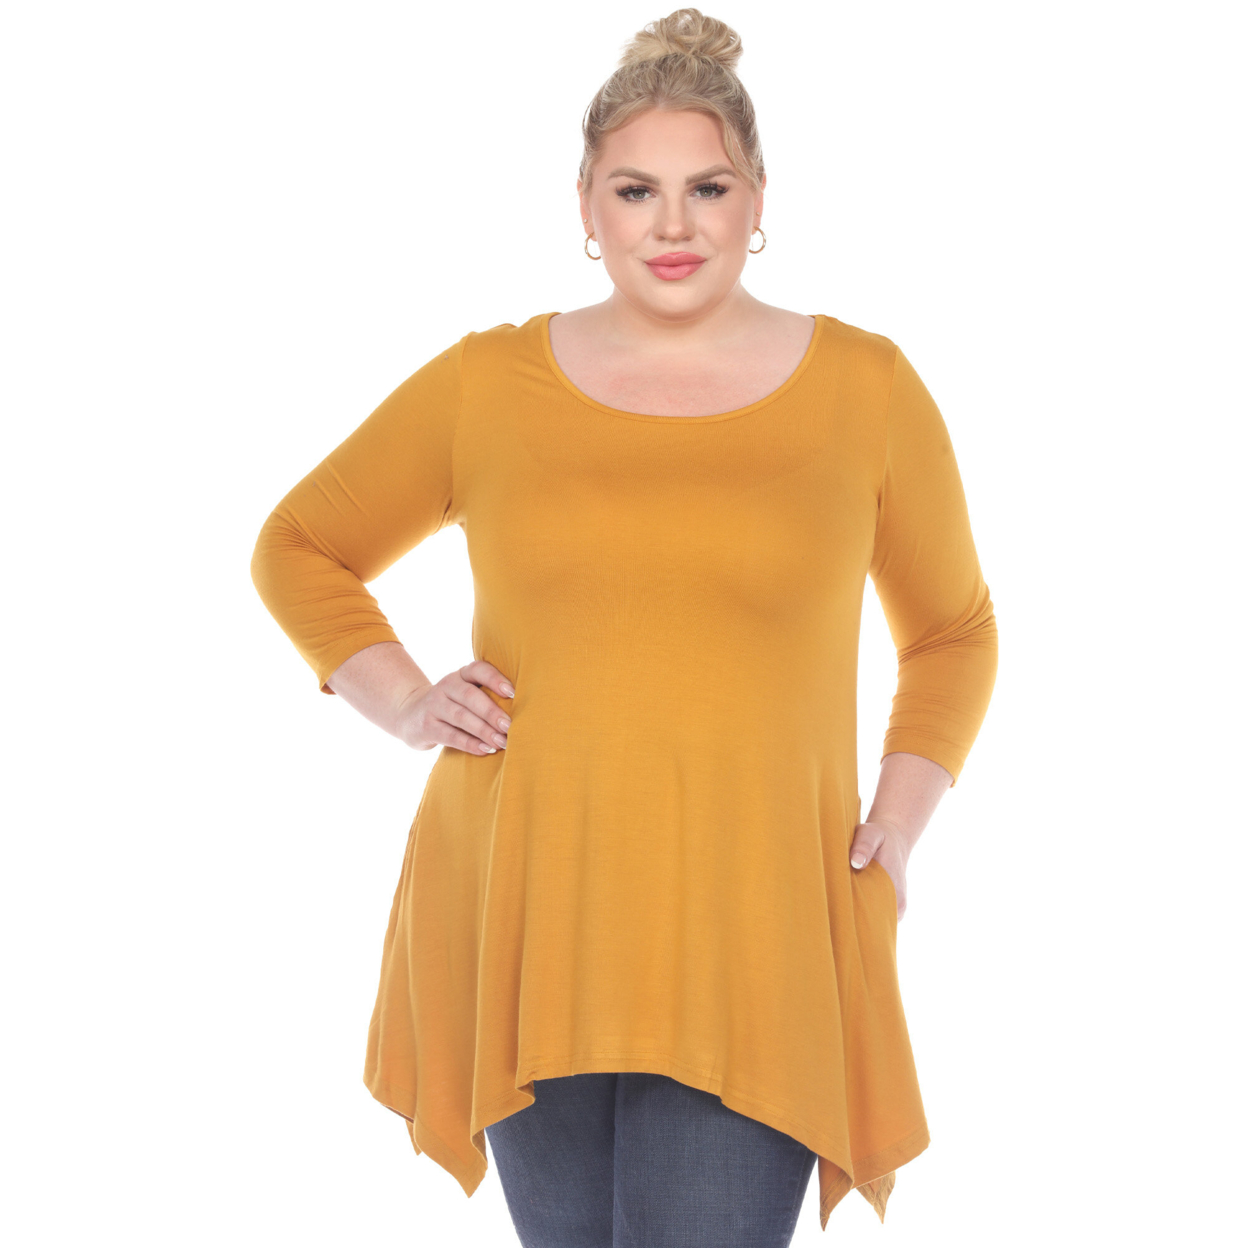 White Mark Women's Quarter Sleeve Tunic Top With Pockets - Mustard, 5X